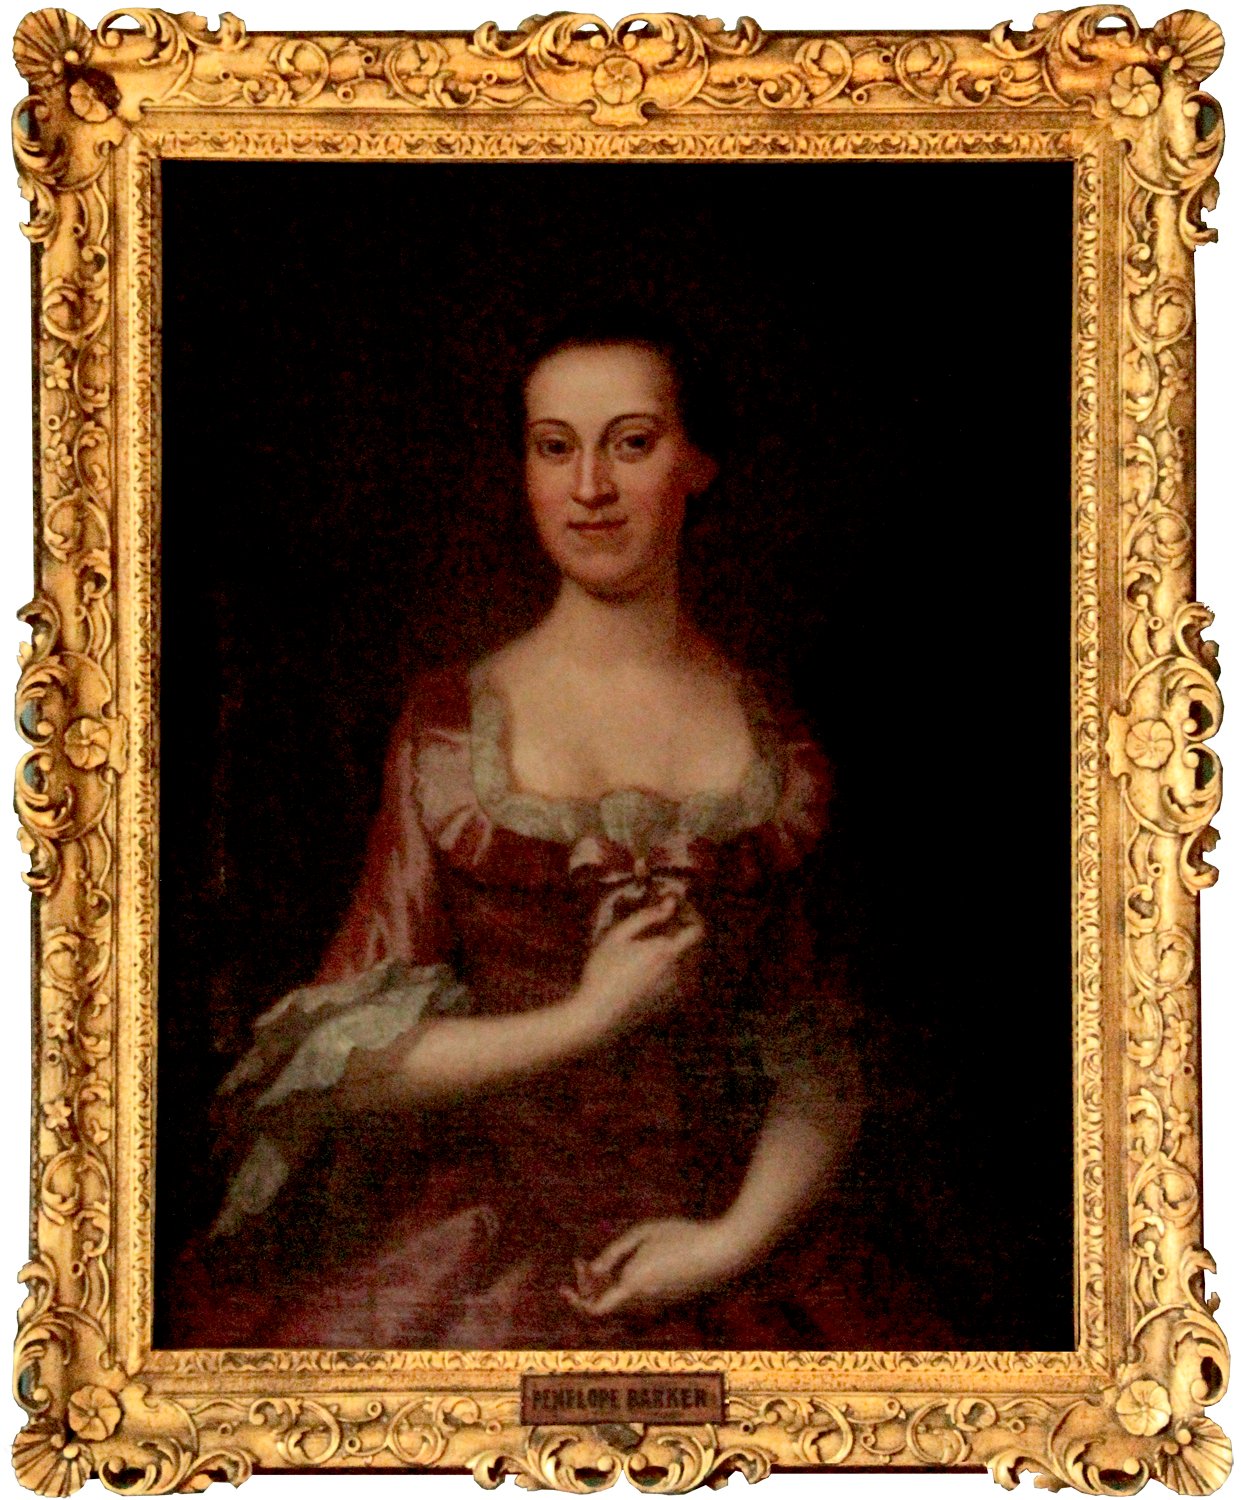 A painting in an elaborate gold frame of a smiling woman in an 18th century red dress.